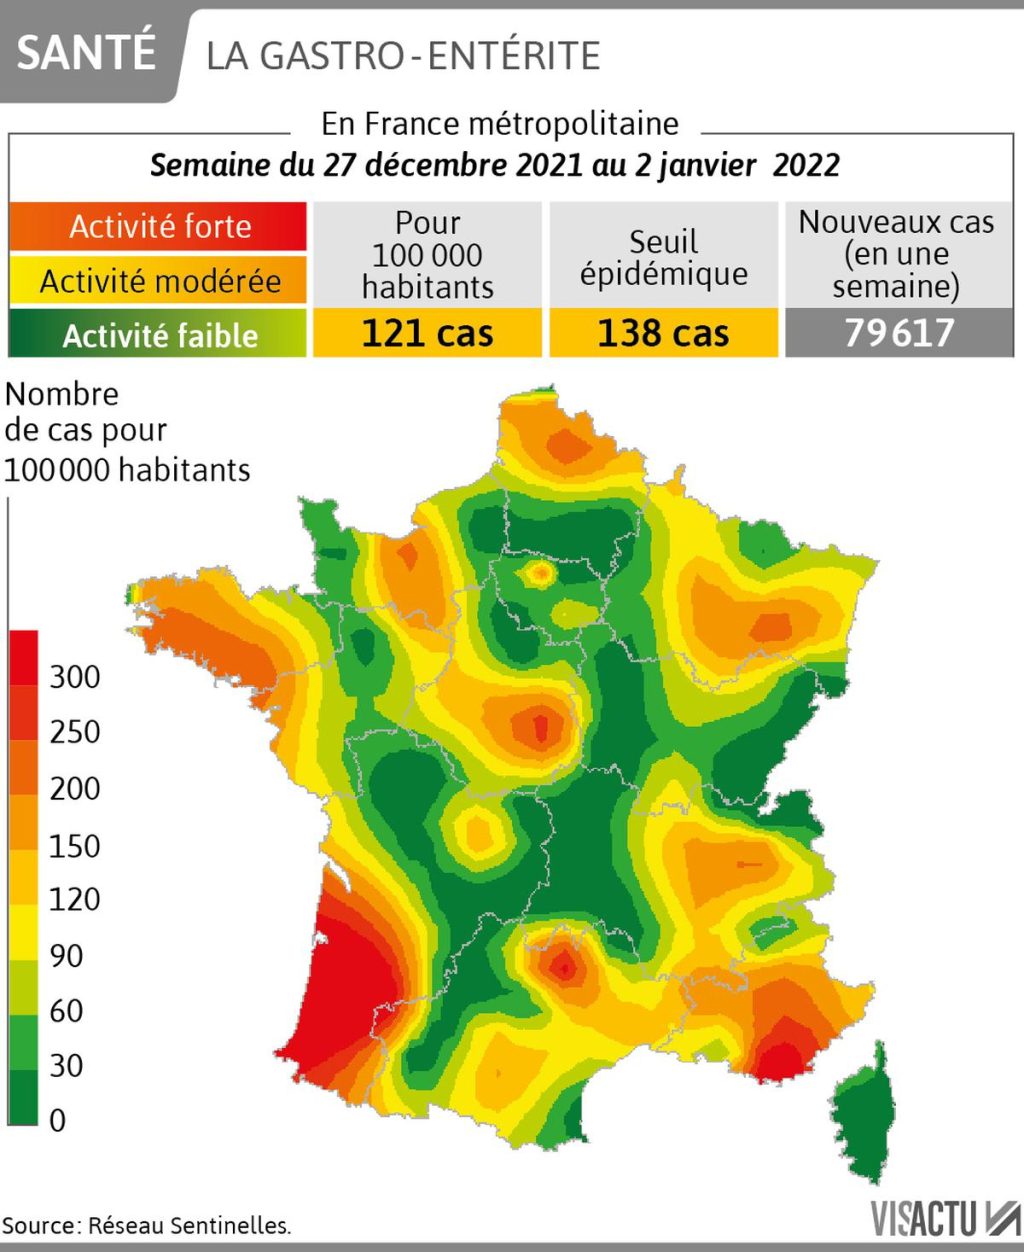 The epidemic reached a threshold in Nouvelle-Aquitaine